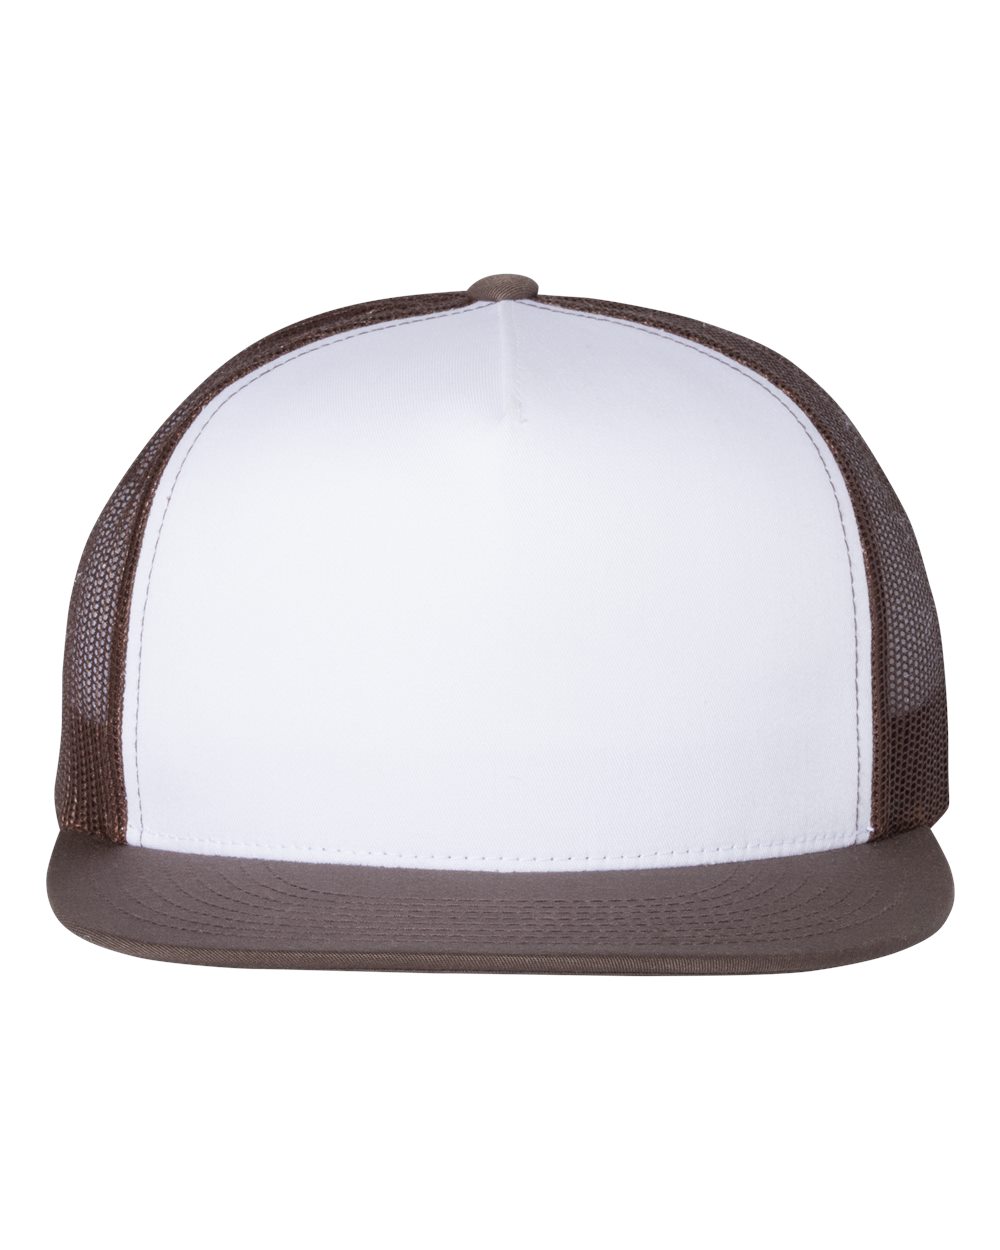 12 Leather Patch Hats